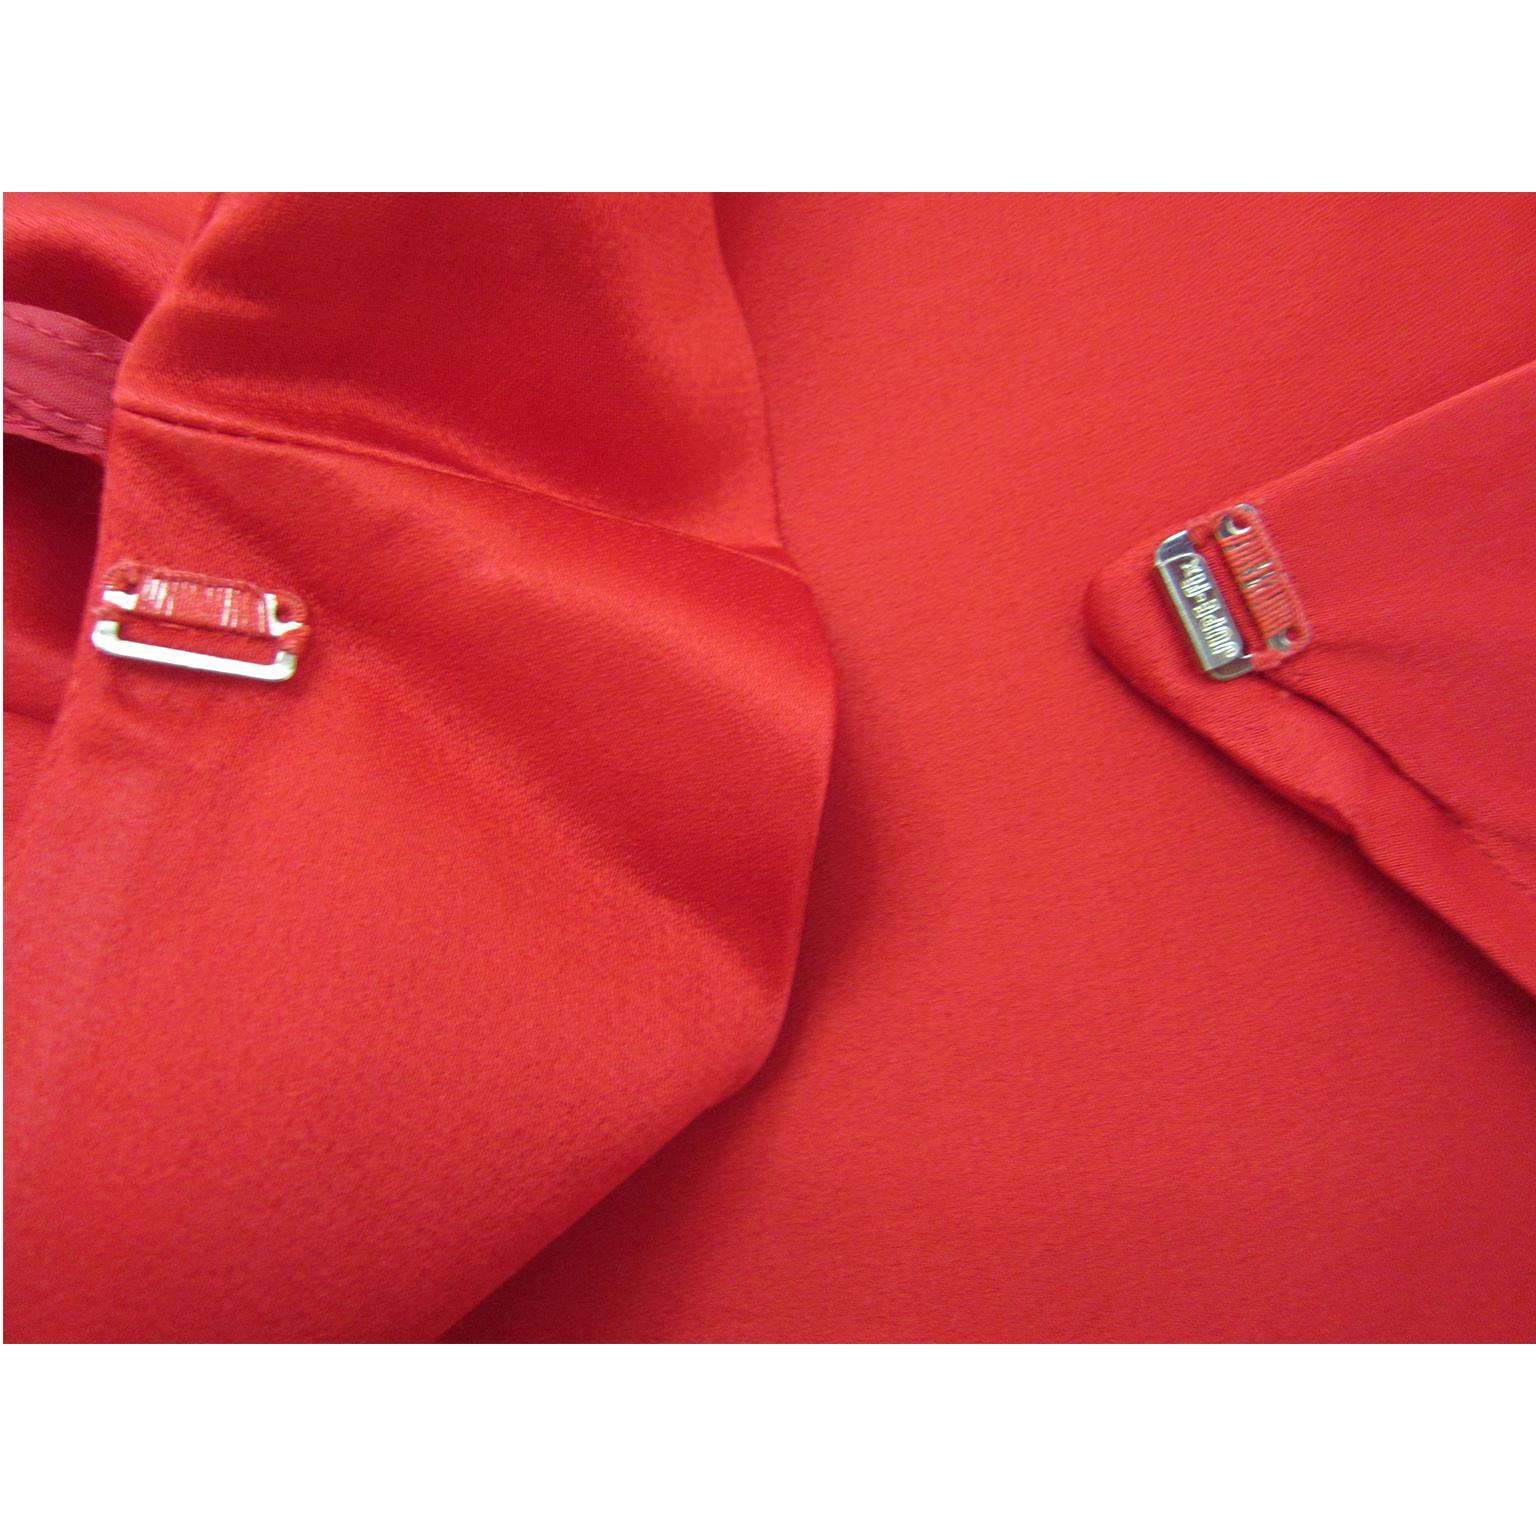 YSL Rive Gauche Royal Red Satin Skirt With Bow 1985 2